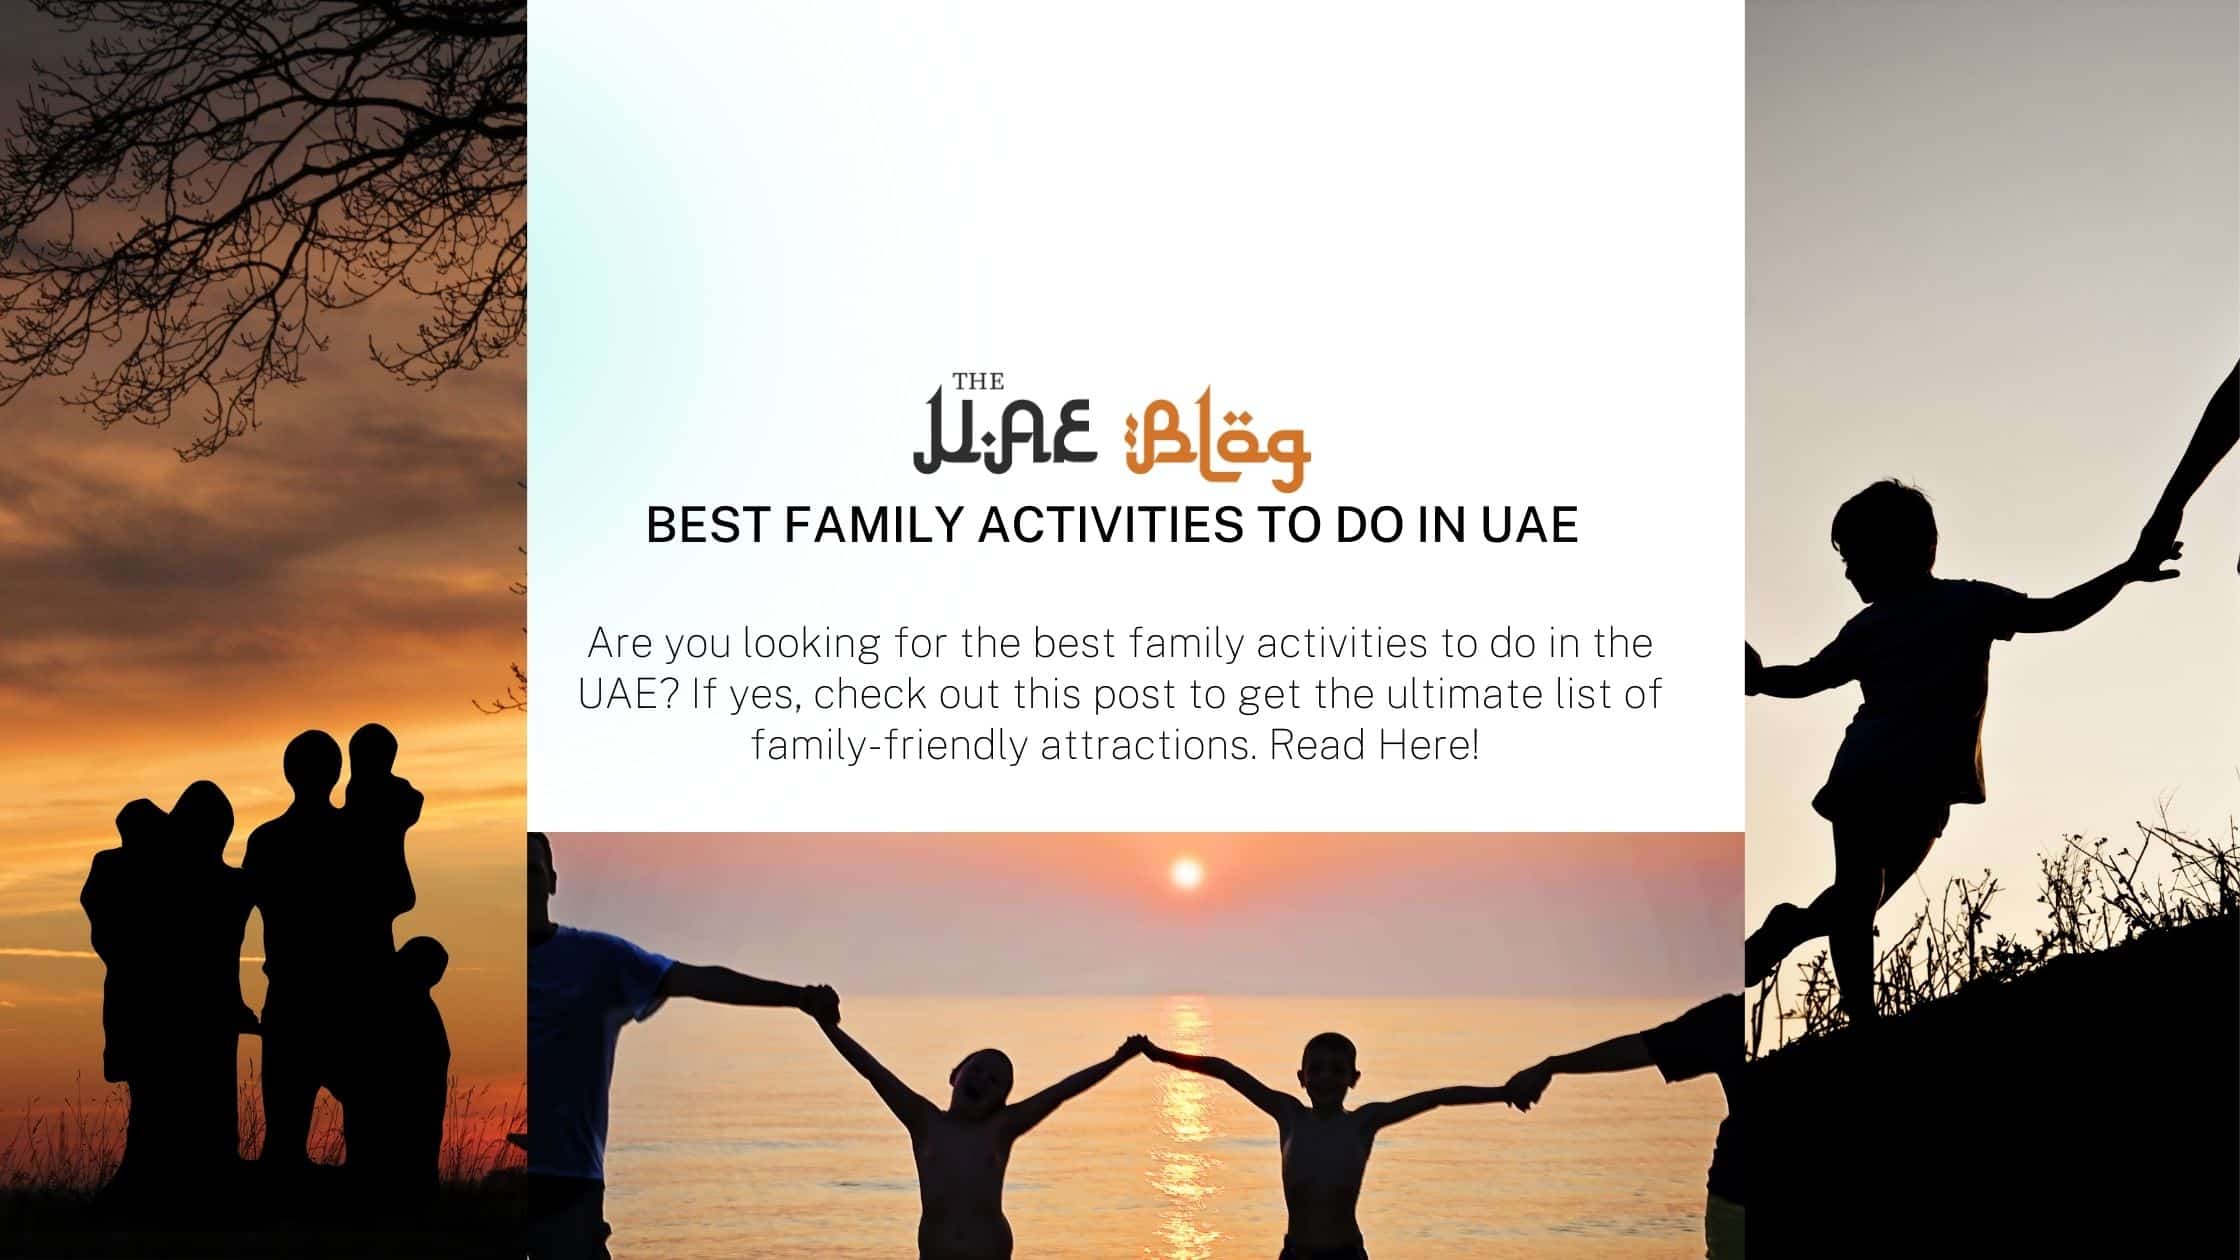 Best family activities to do in UAE